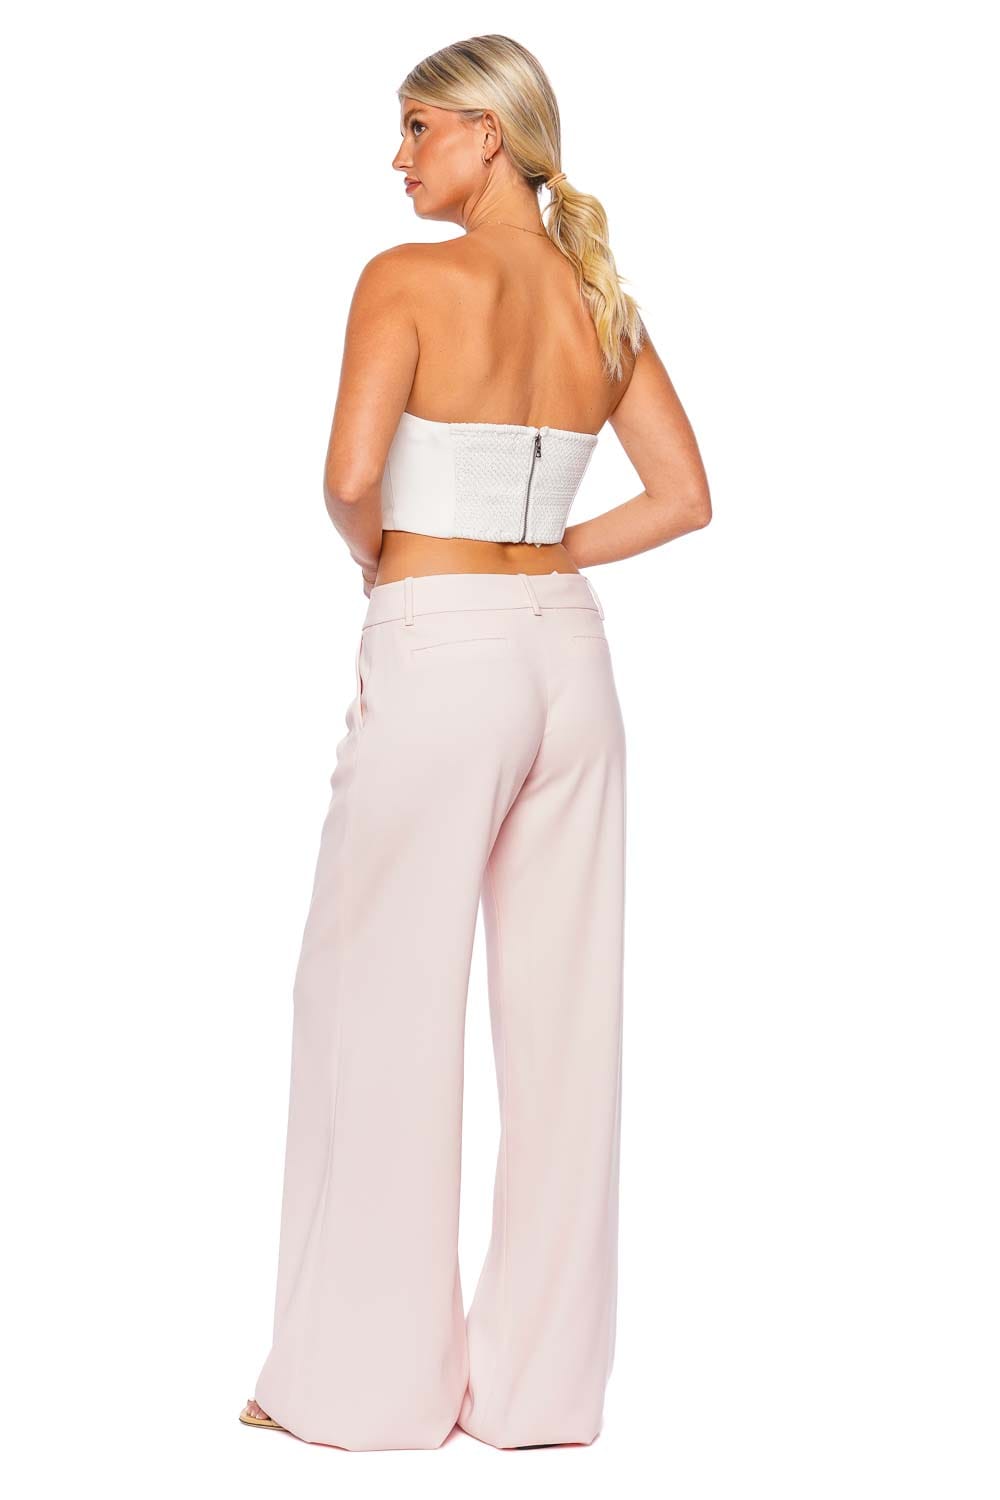 ALICE + OLIVIA Eric Low Rise Pant CC404210102 PINK LACE